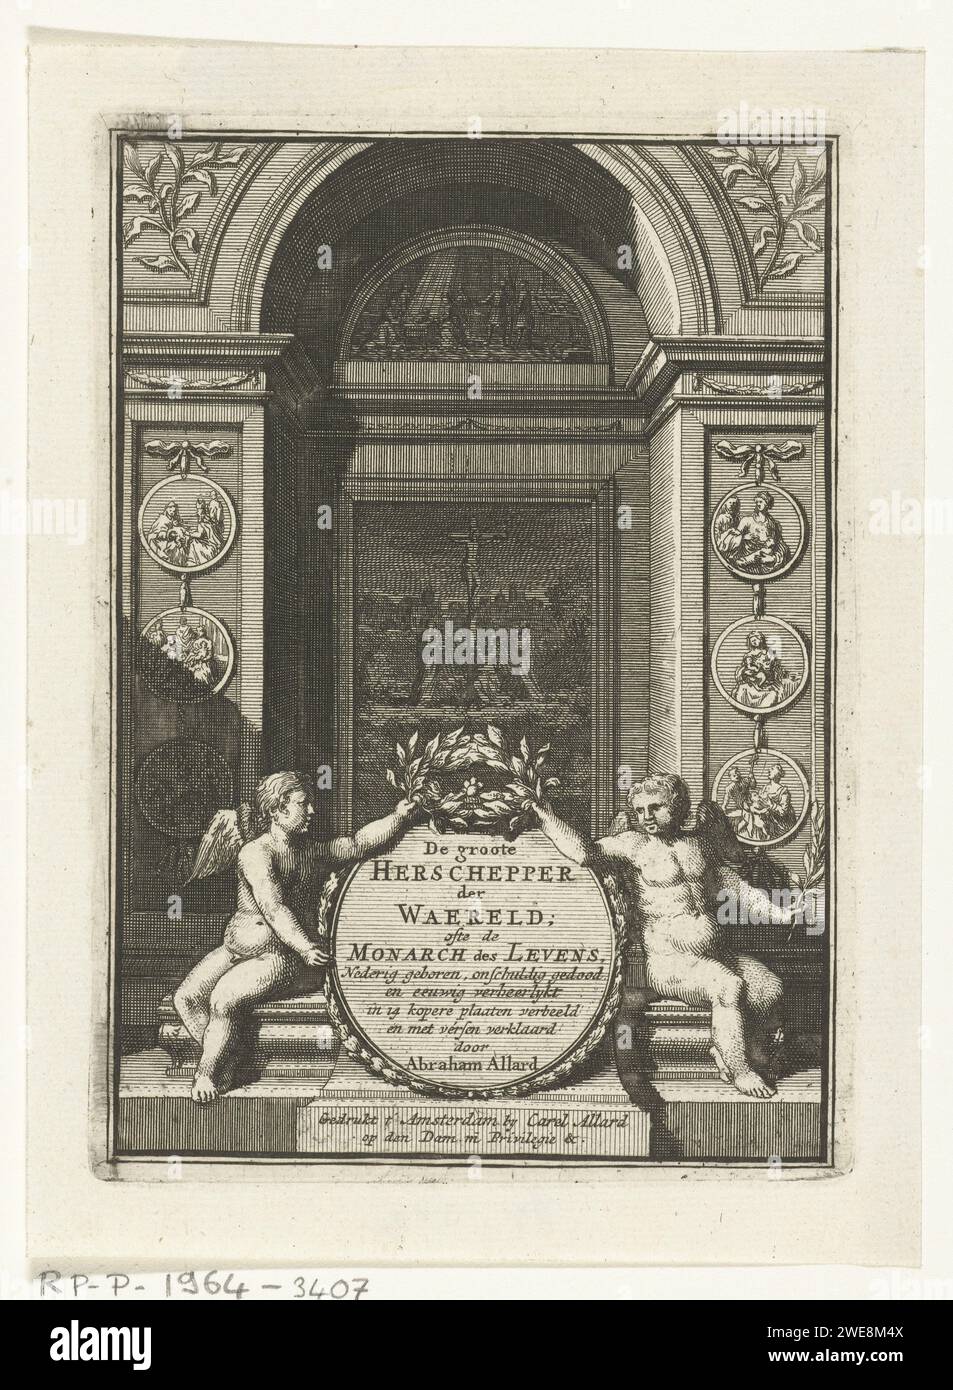 Title page for the Great Herinchepper der Waereld by Abraham Allard, Abraham Allard, c. 1700 - c. 1710 print Two putti hold a round plaque with the title of the book, above the plaque a laurel wreath. In the background an architectural niche with two images, one of the crucifixion and one of the worship of the shepherds. Three medallions with Christian performances on either side of the NIS. Amsterdam paper etching adoration of the Christ-child by the shepherds; Mary and Joseph present. crucified Christ with Mary, John, and Mary Magdalene Stock Photo